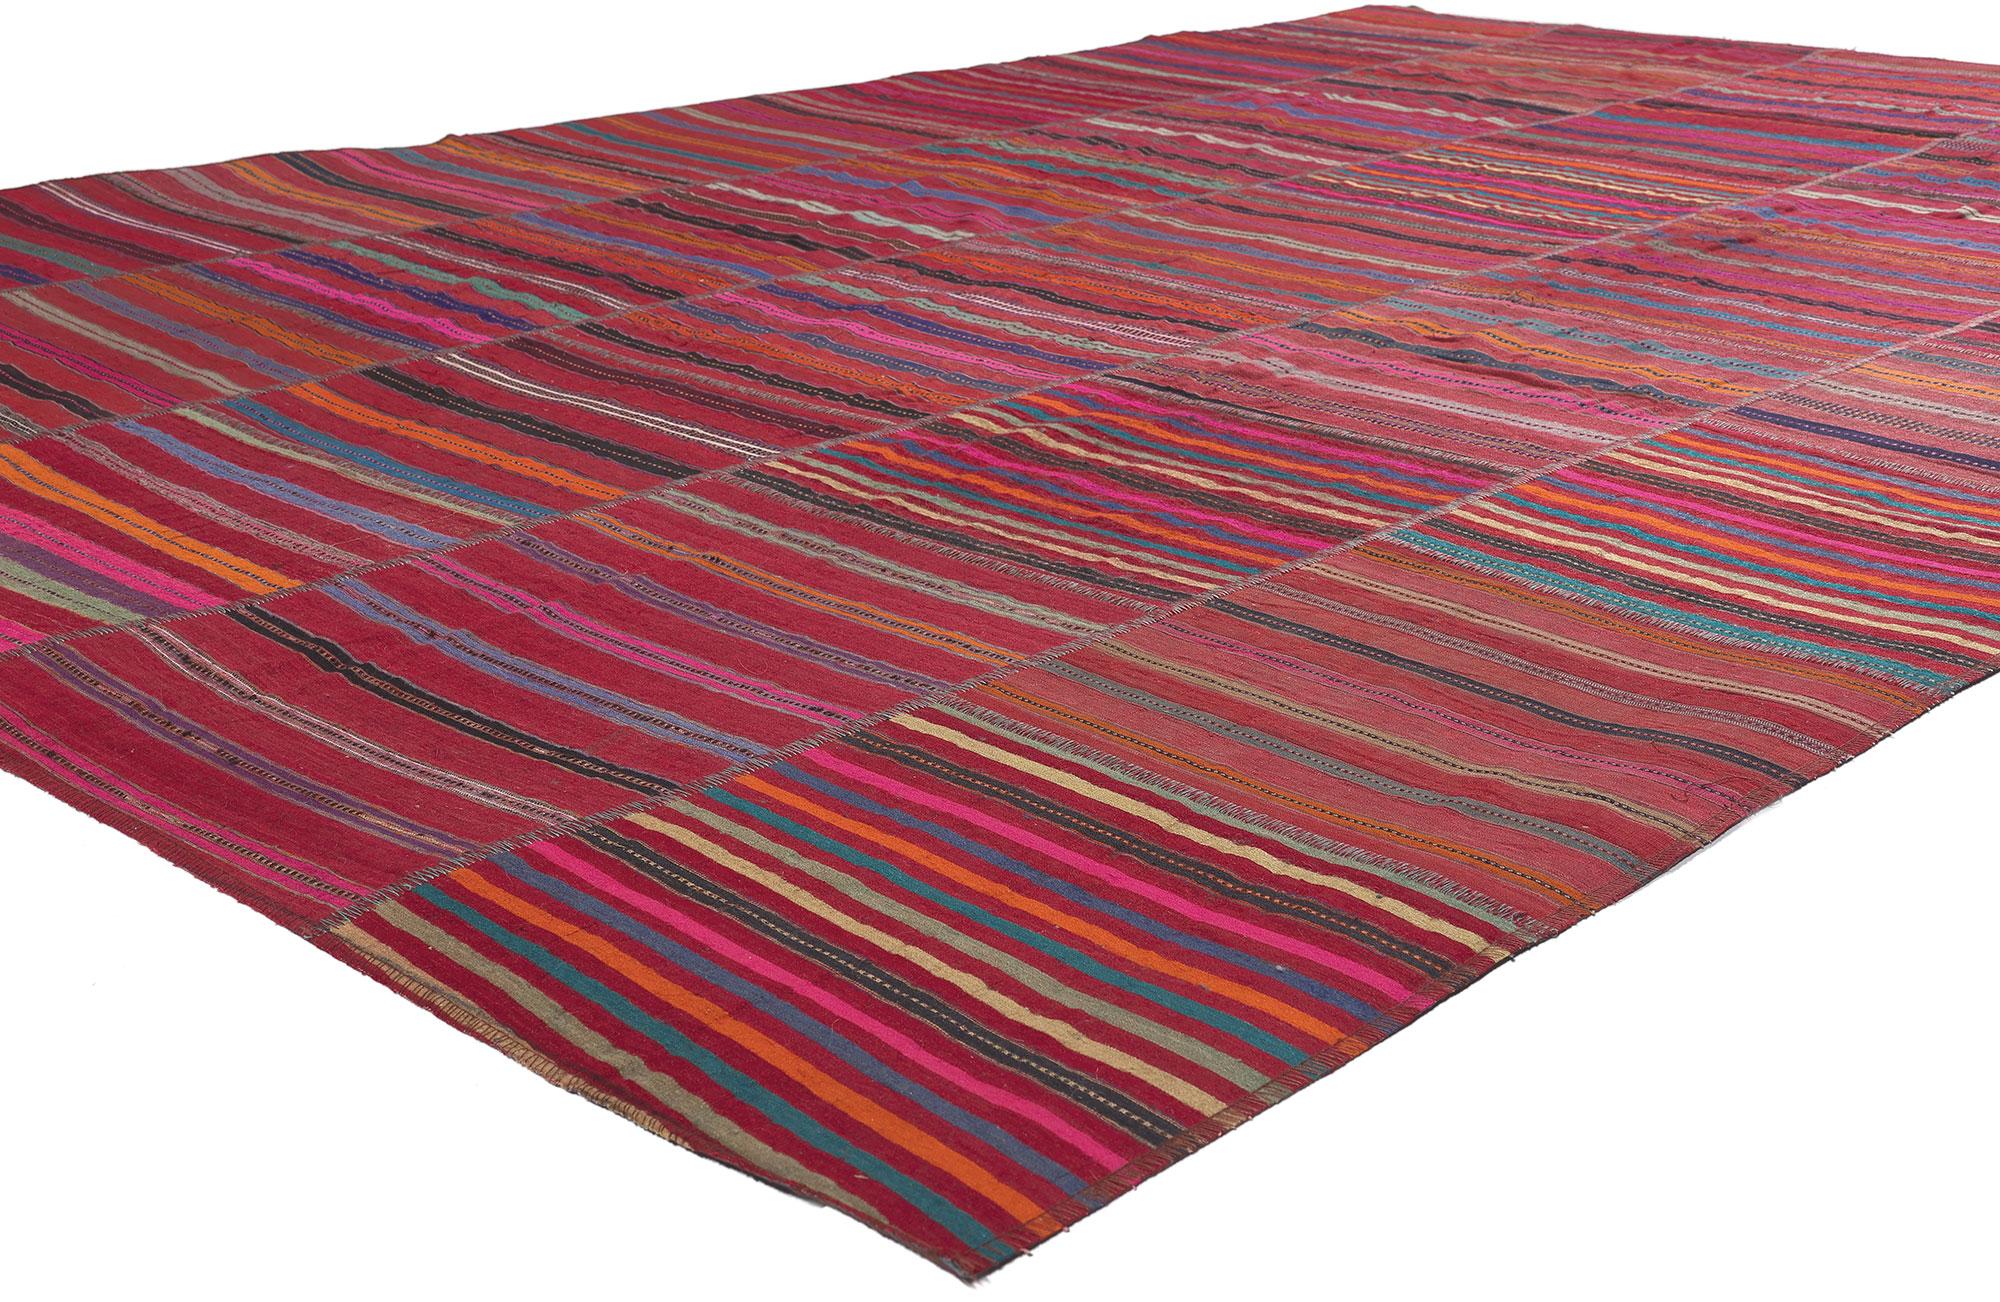 60648 Vintage Turkish Striped Kilim Rug, 07'03 x 11'00.
Rugged beauty collides with weathered charm and rustic sensibility in this handwoven wool vintage Turkish kilim rug. The striped panel design and vibrant colors woven into this piece work